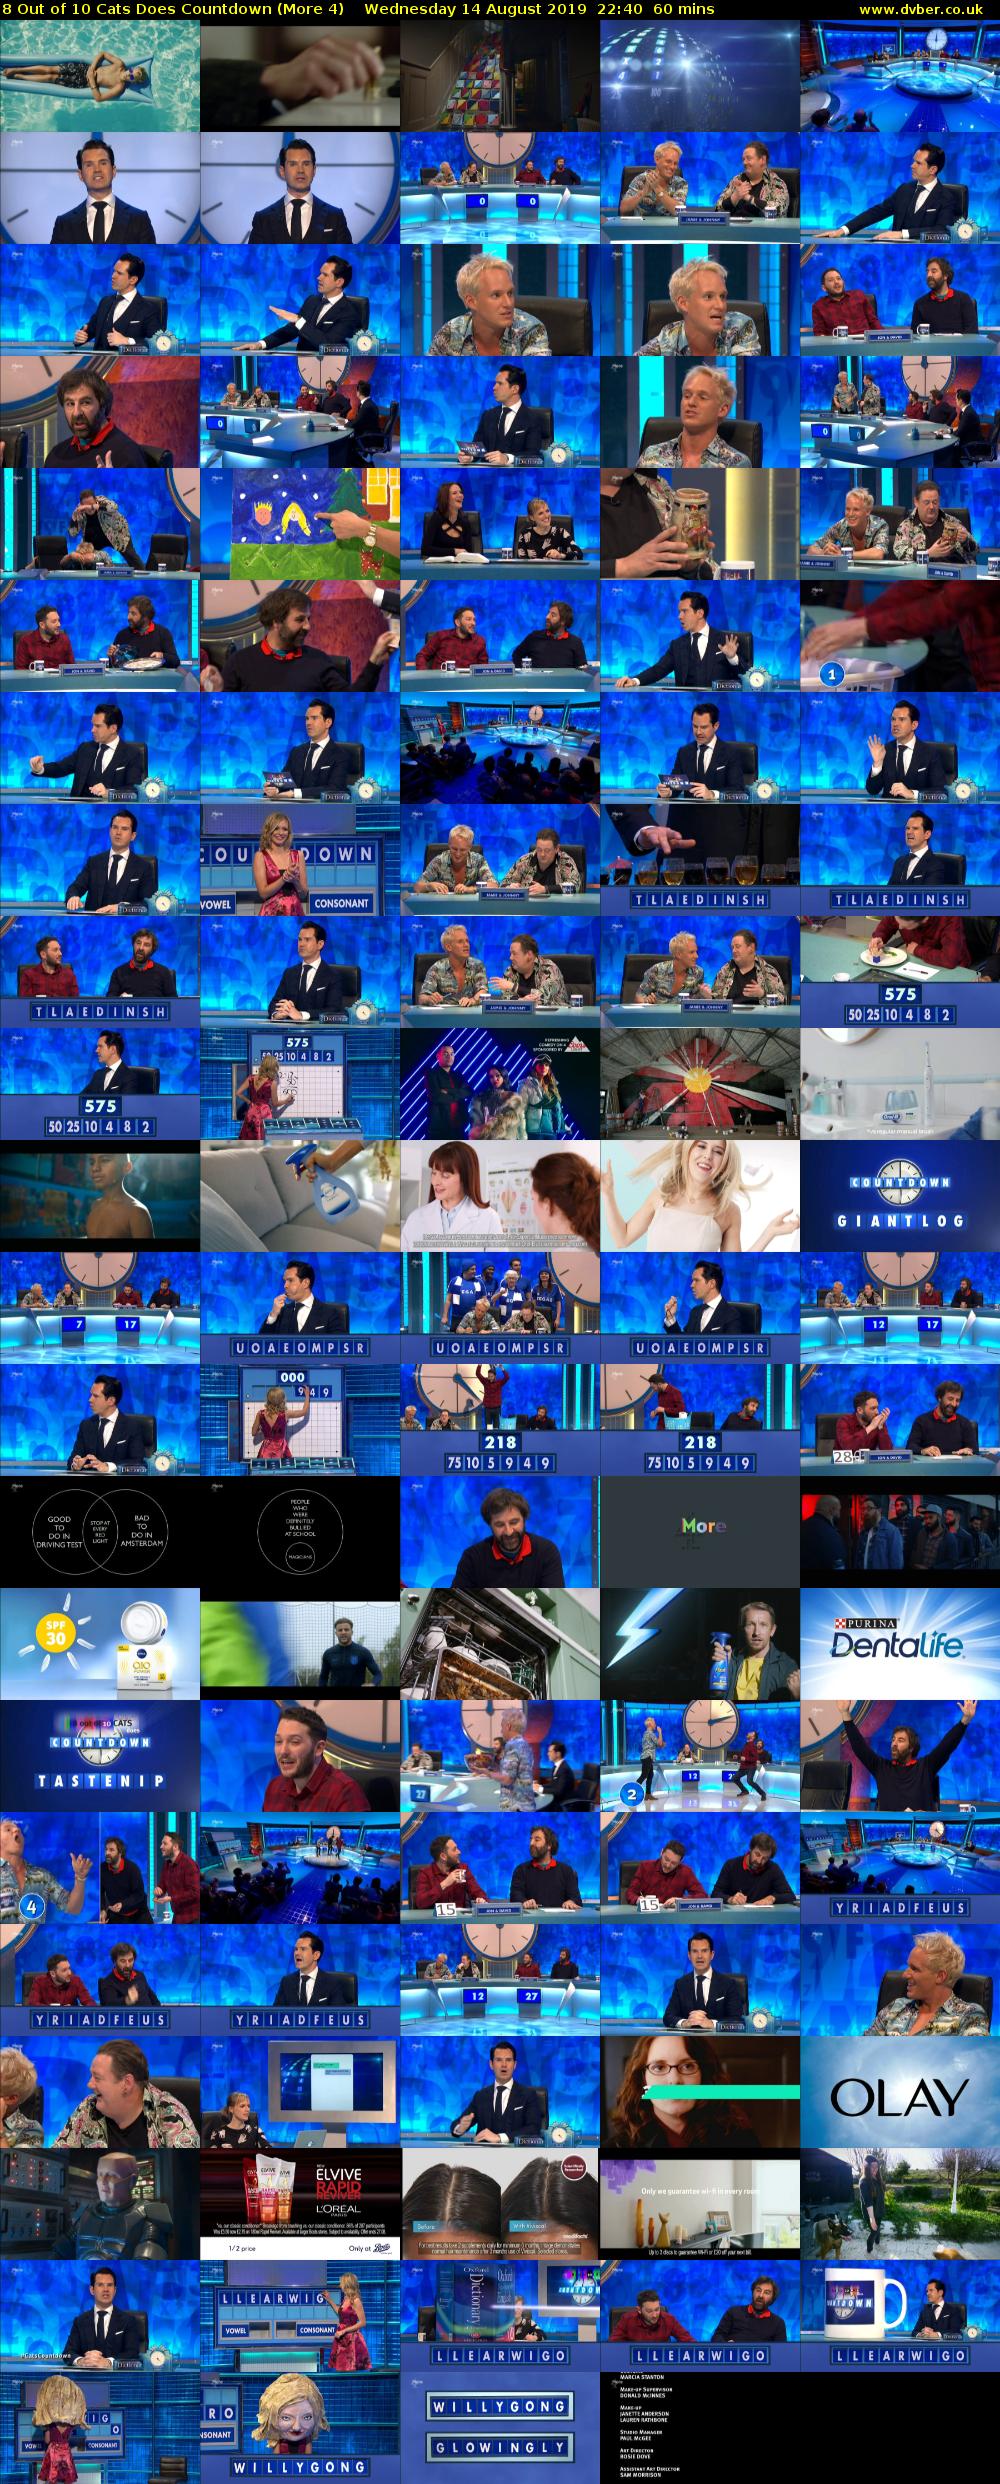 8 Out of 10 Cats Does Countdown (More 4) Wednesday 14 August 2019 22:40 - 23:40